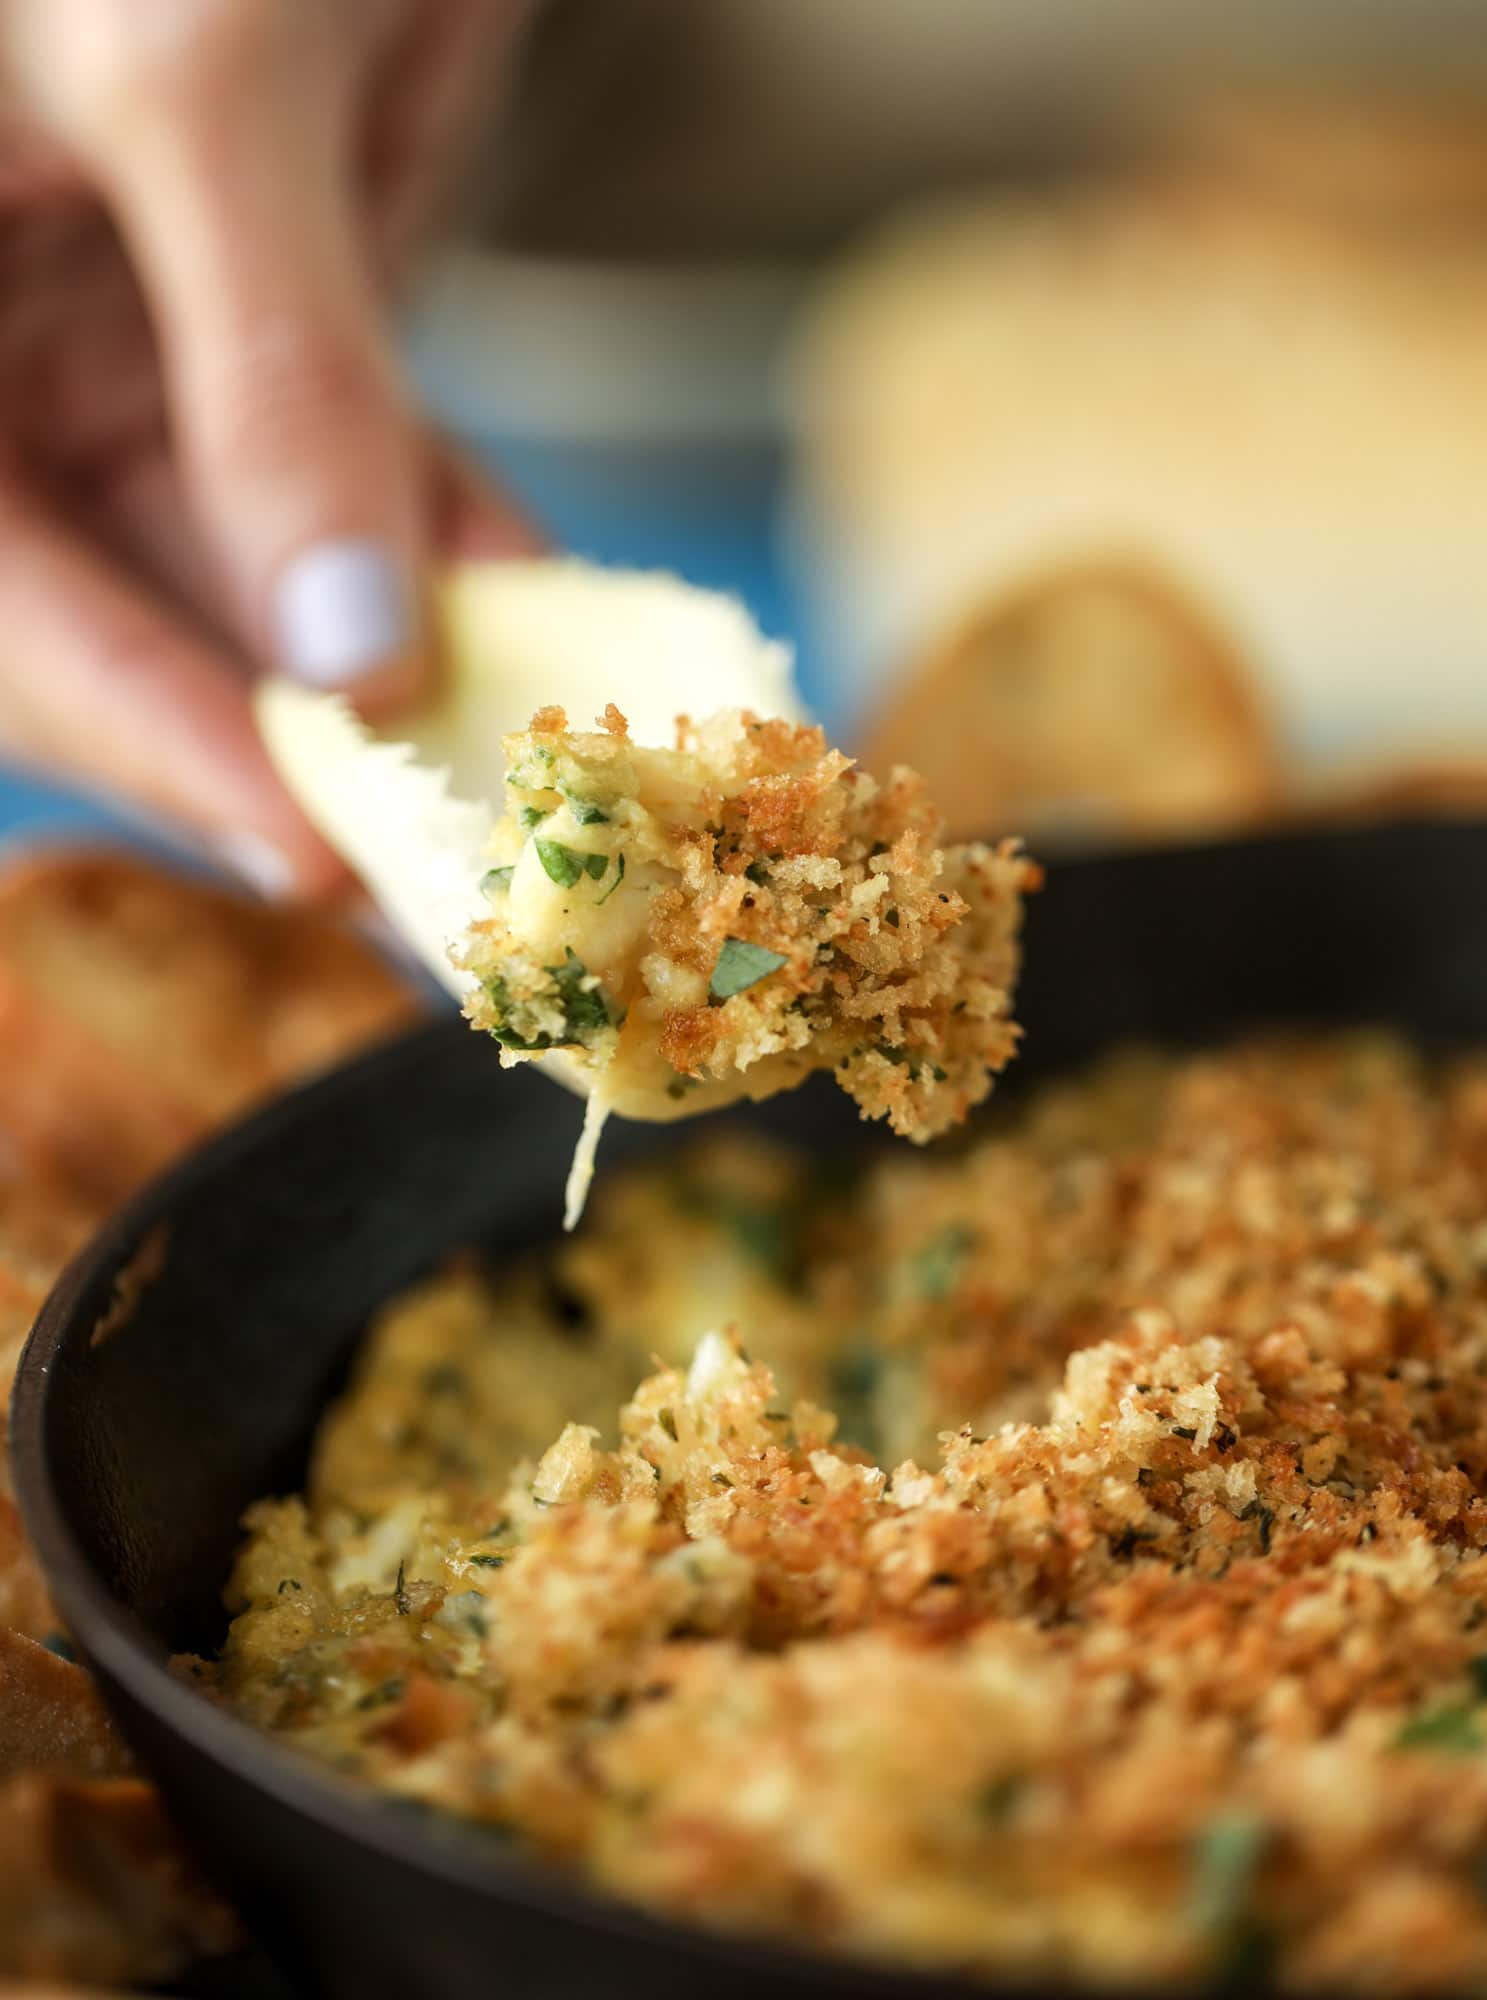 This deviled crab dip is the perfect hot summer appetizer. Lump crab, a creamy, decadent sauce, crunchy breadcrumbs and fresh endive for dipping. YES.